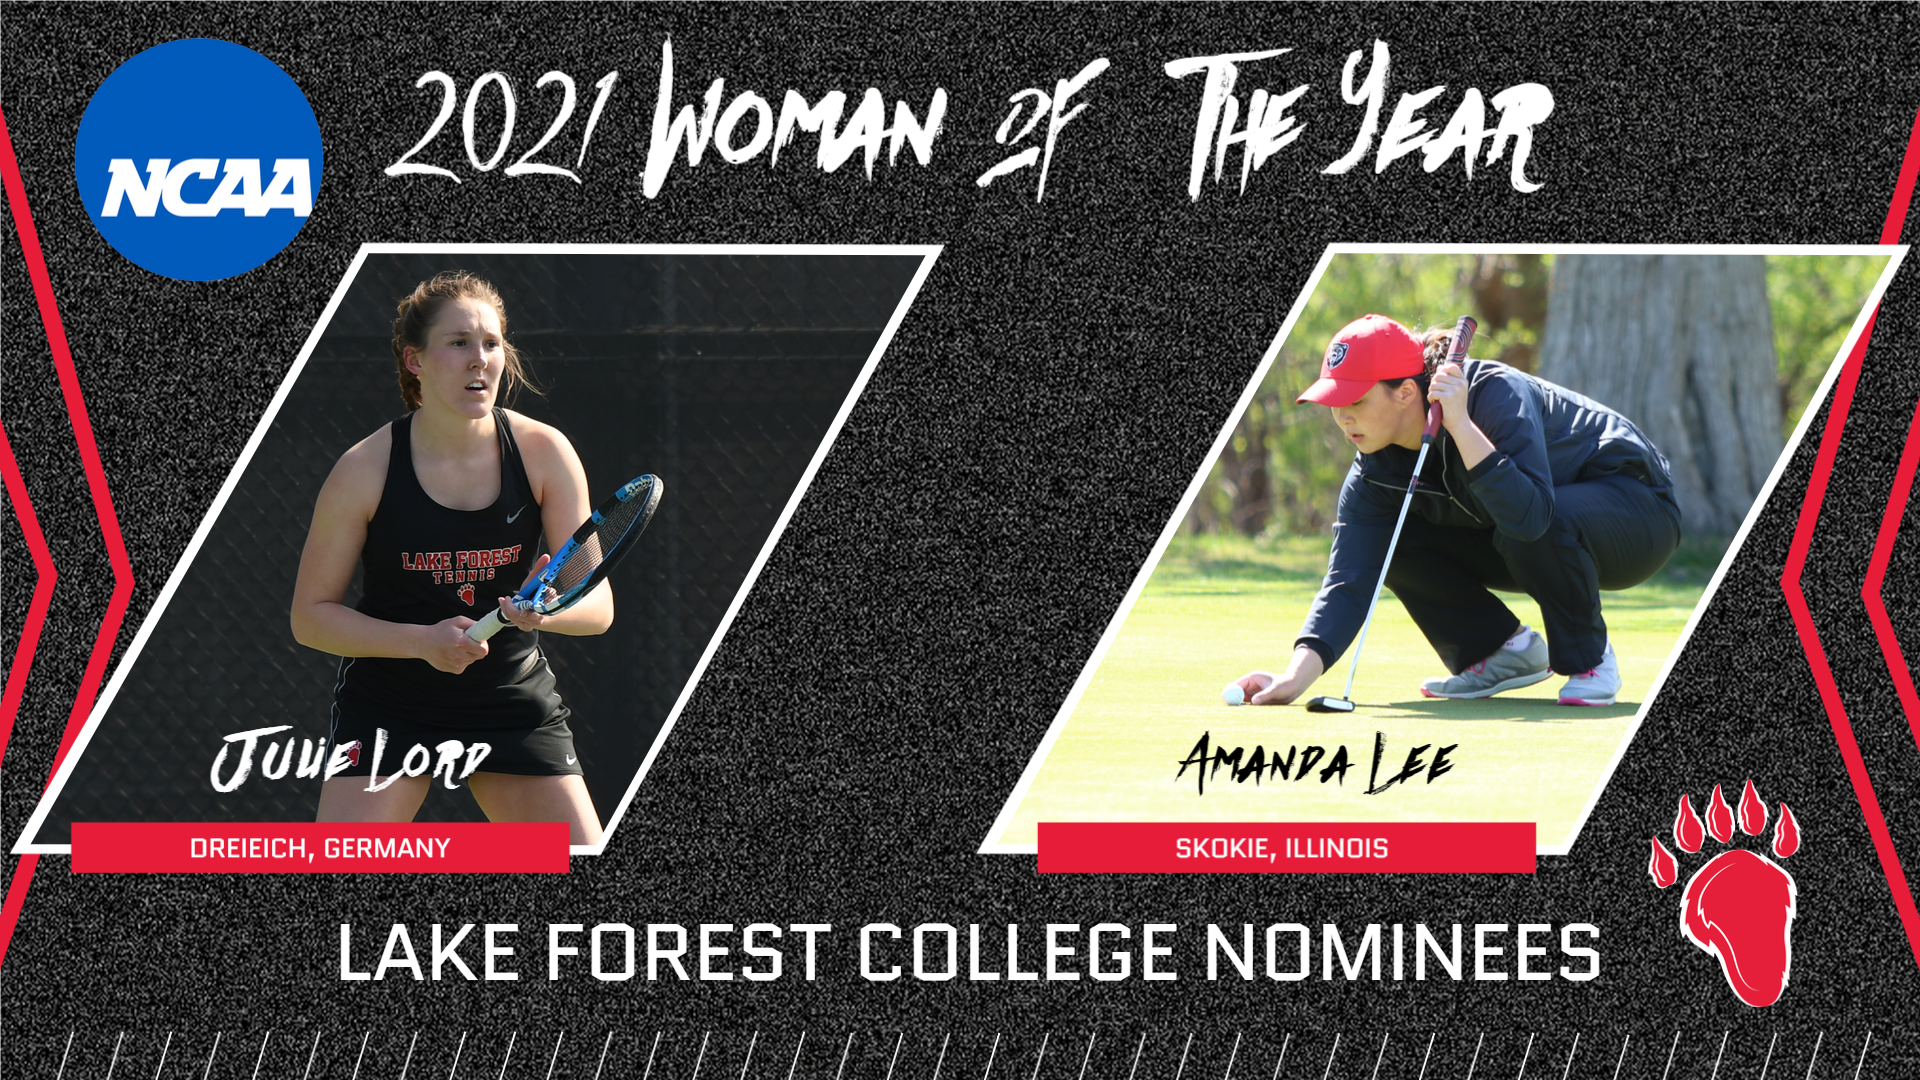 Julie Lord and Amanda Lee Nominated for NCAA Woman of the Year